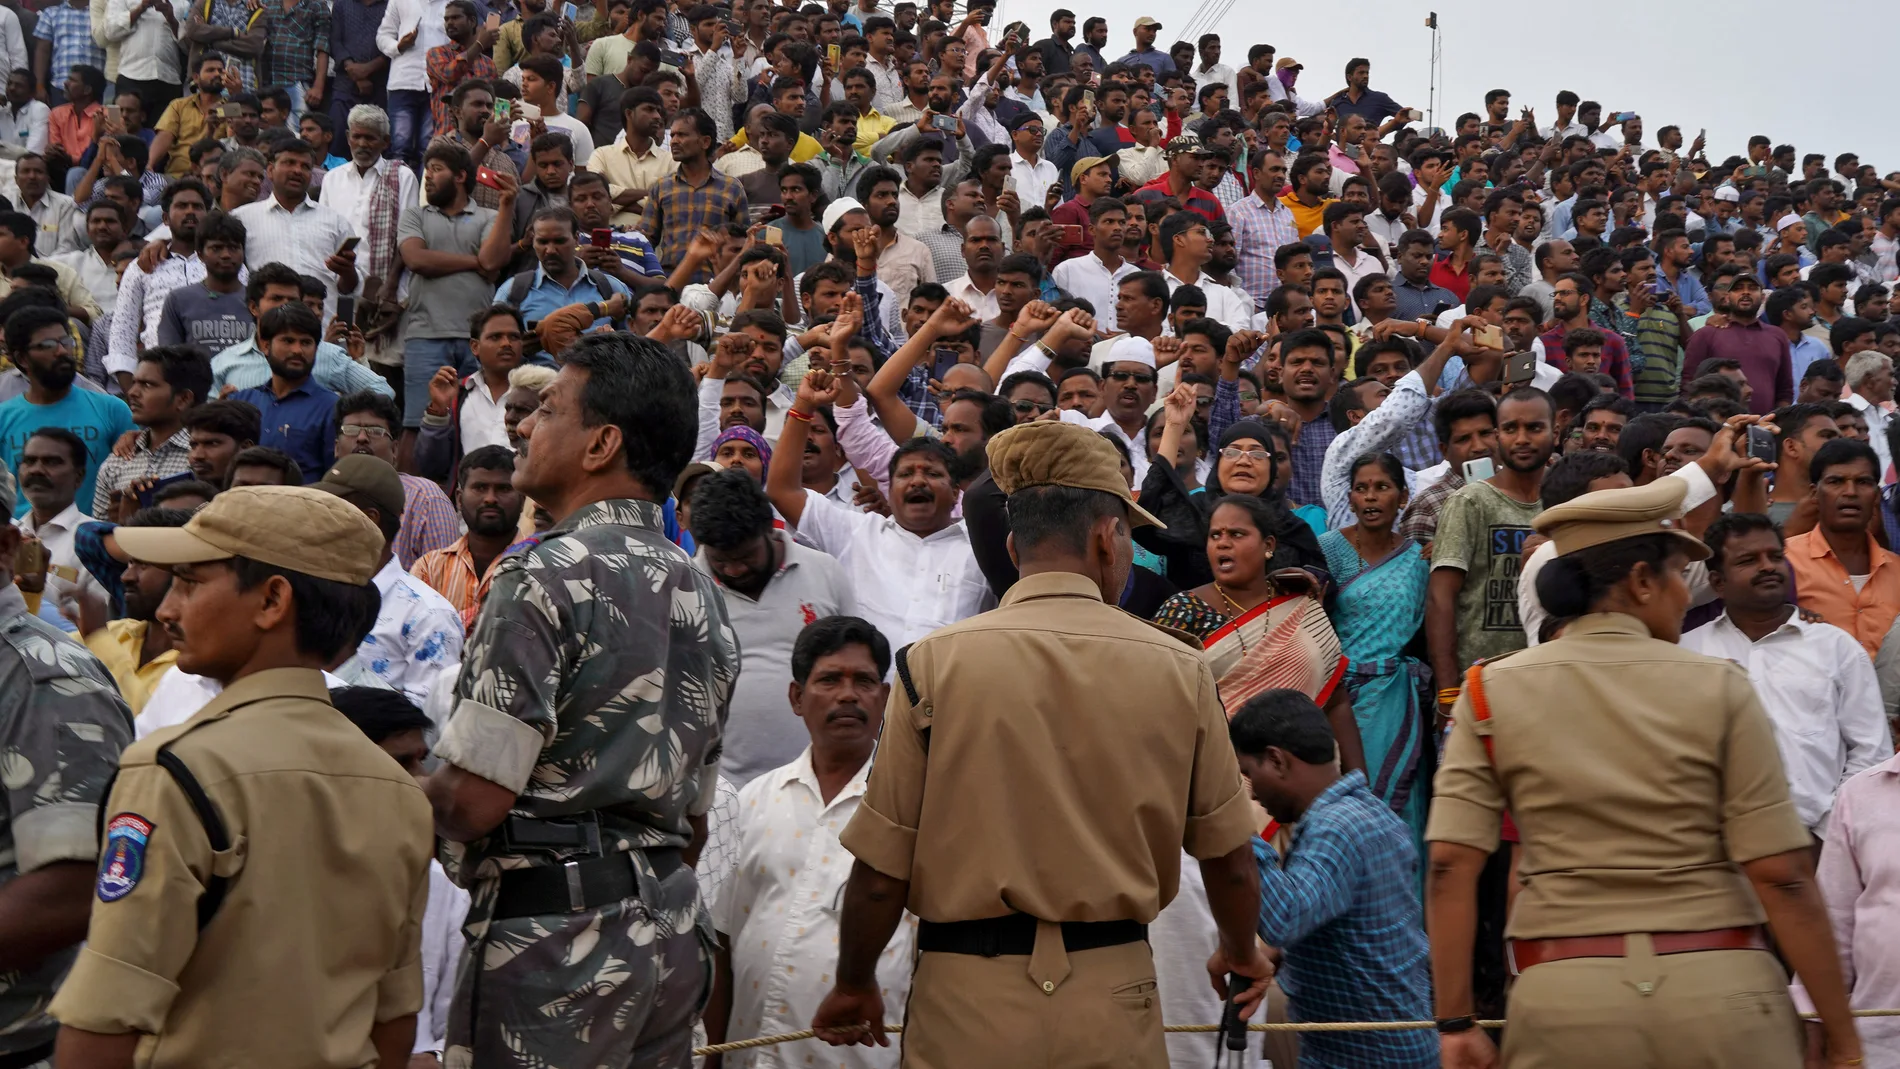 People shout slogans as they gather at the site where police shot dead four men suspected of raping and killing a 27-year-old veterinarian, in Chatanpally on the outskirts of Shadnagar town